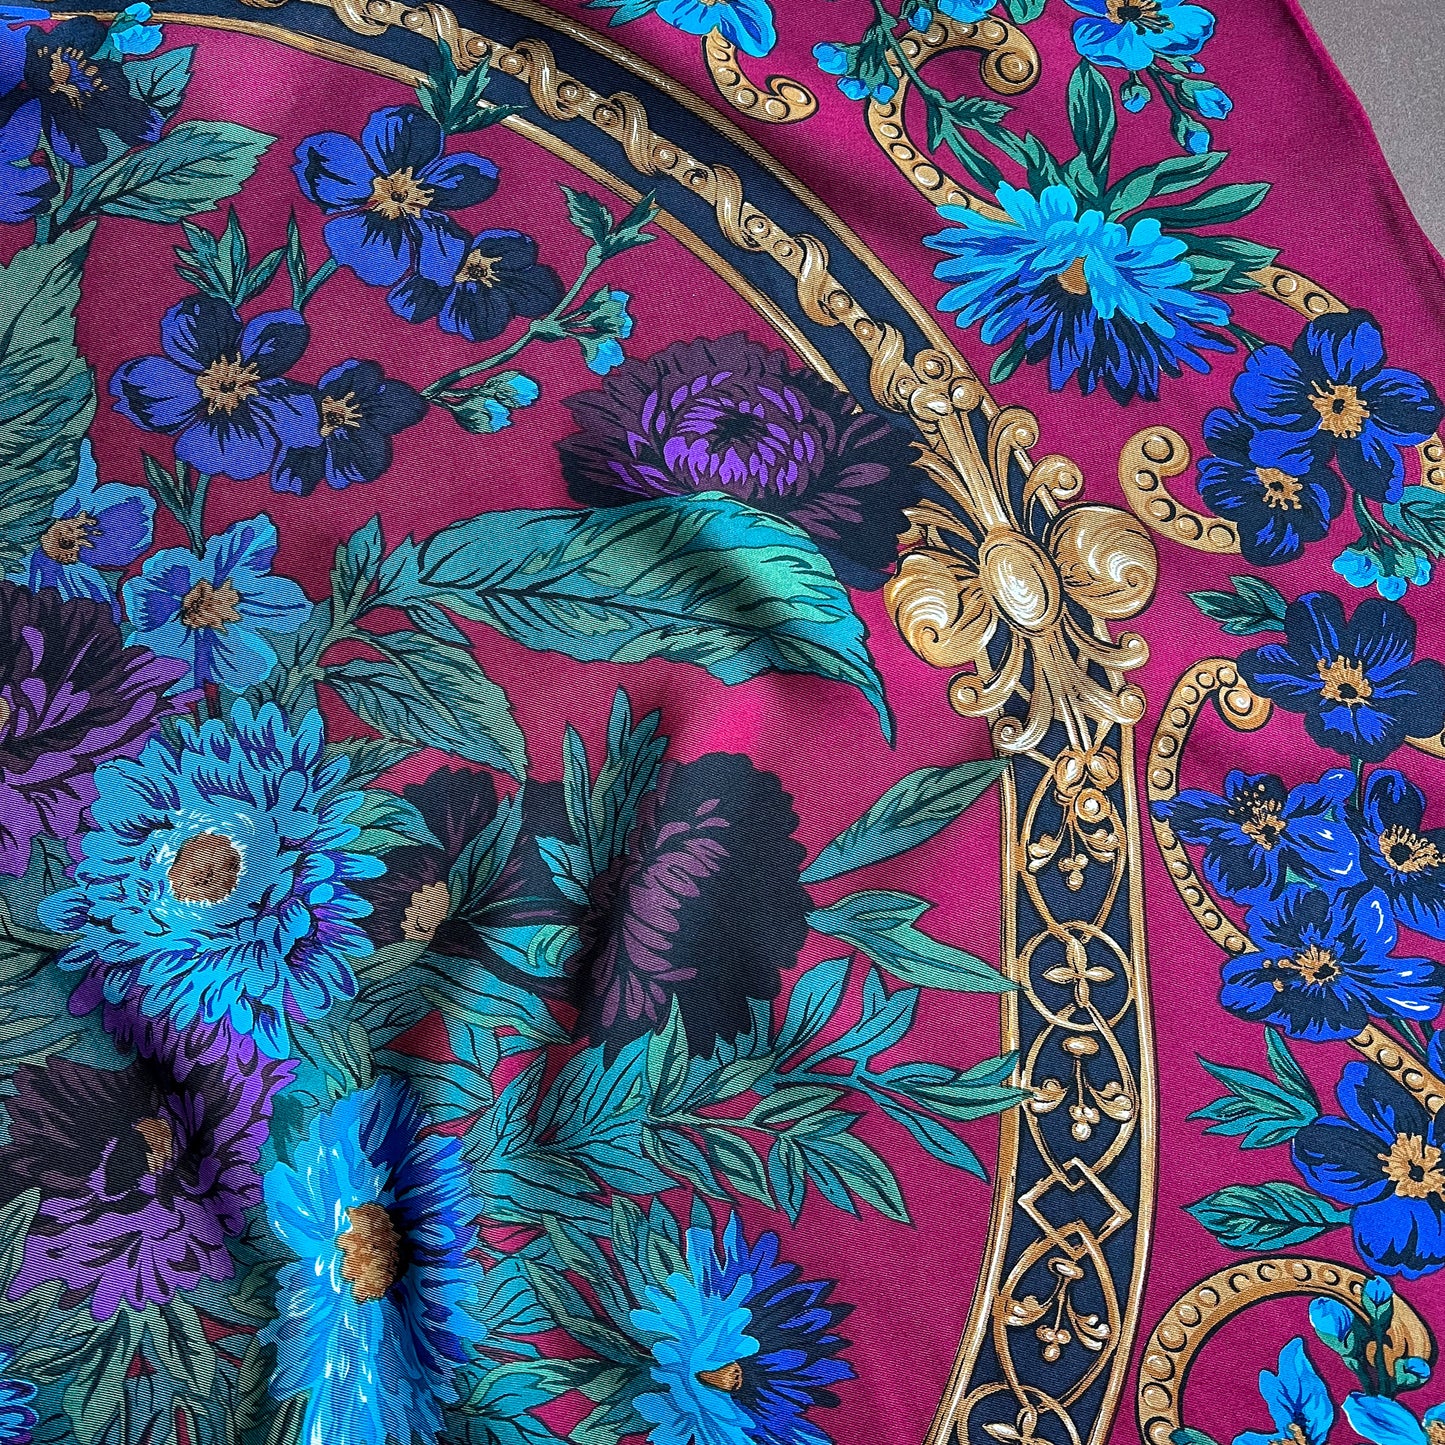 1980s Purple and Blue Flowers Mixed With Ornate Details Scarf